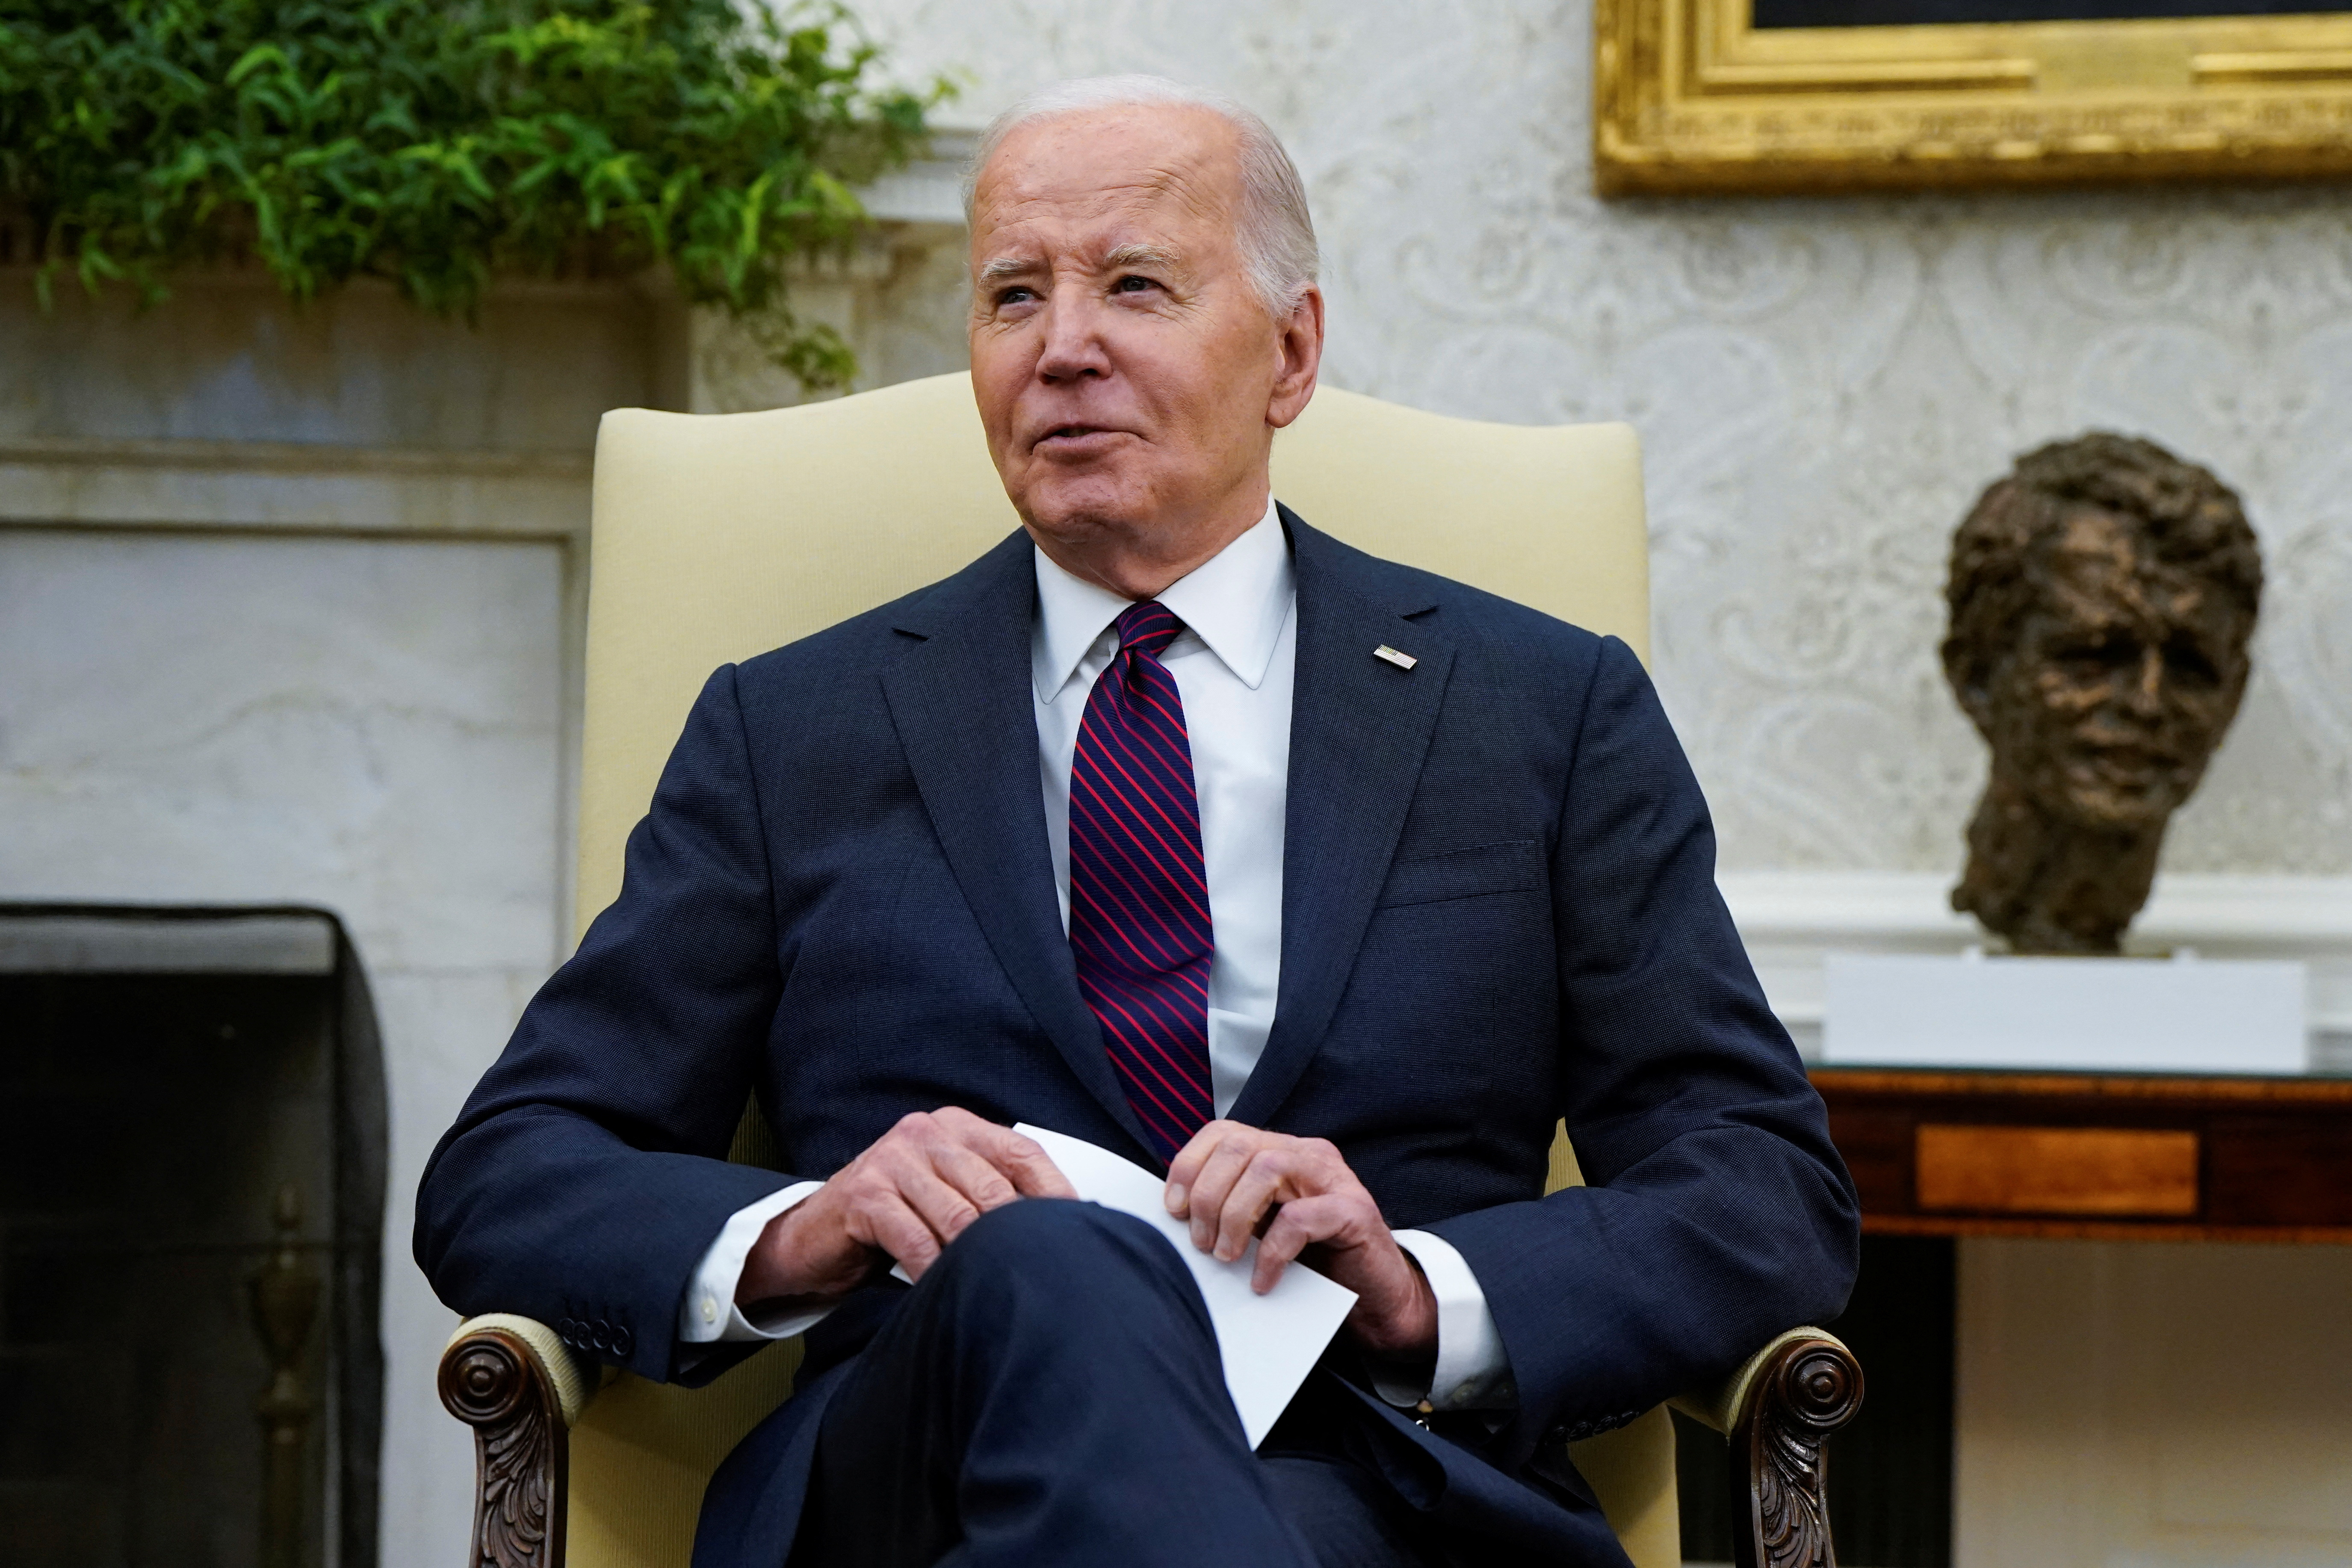 U.S. President Biden meets with Czech Prime Minister Fiala at the White House